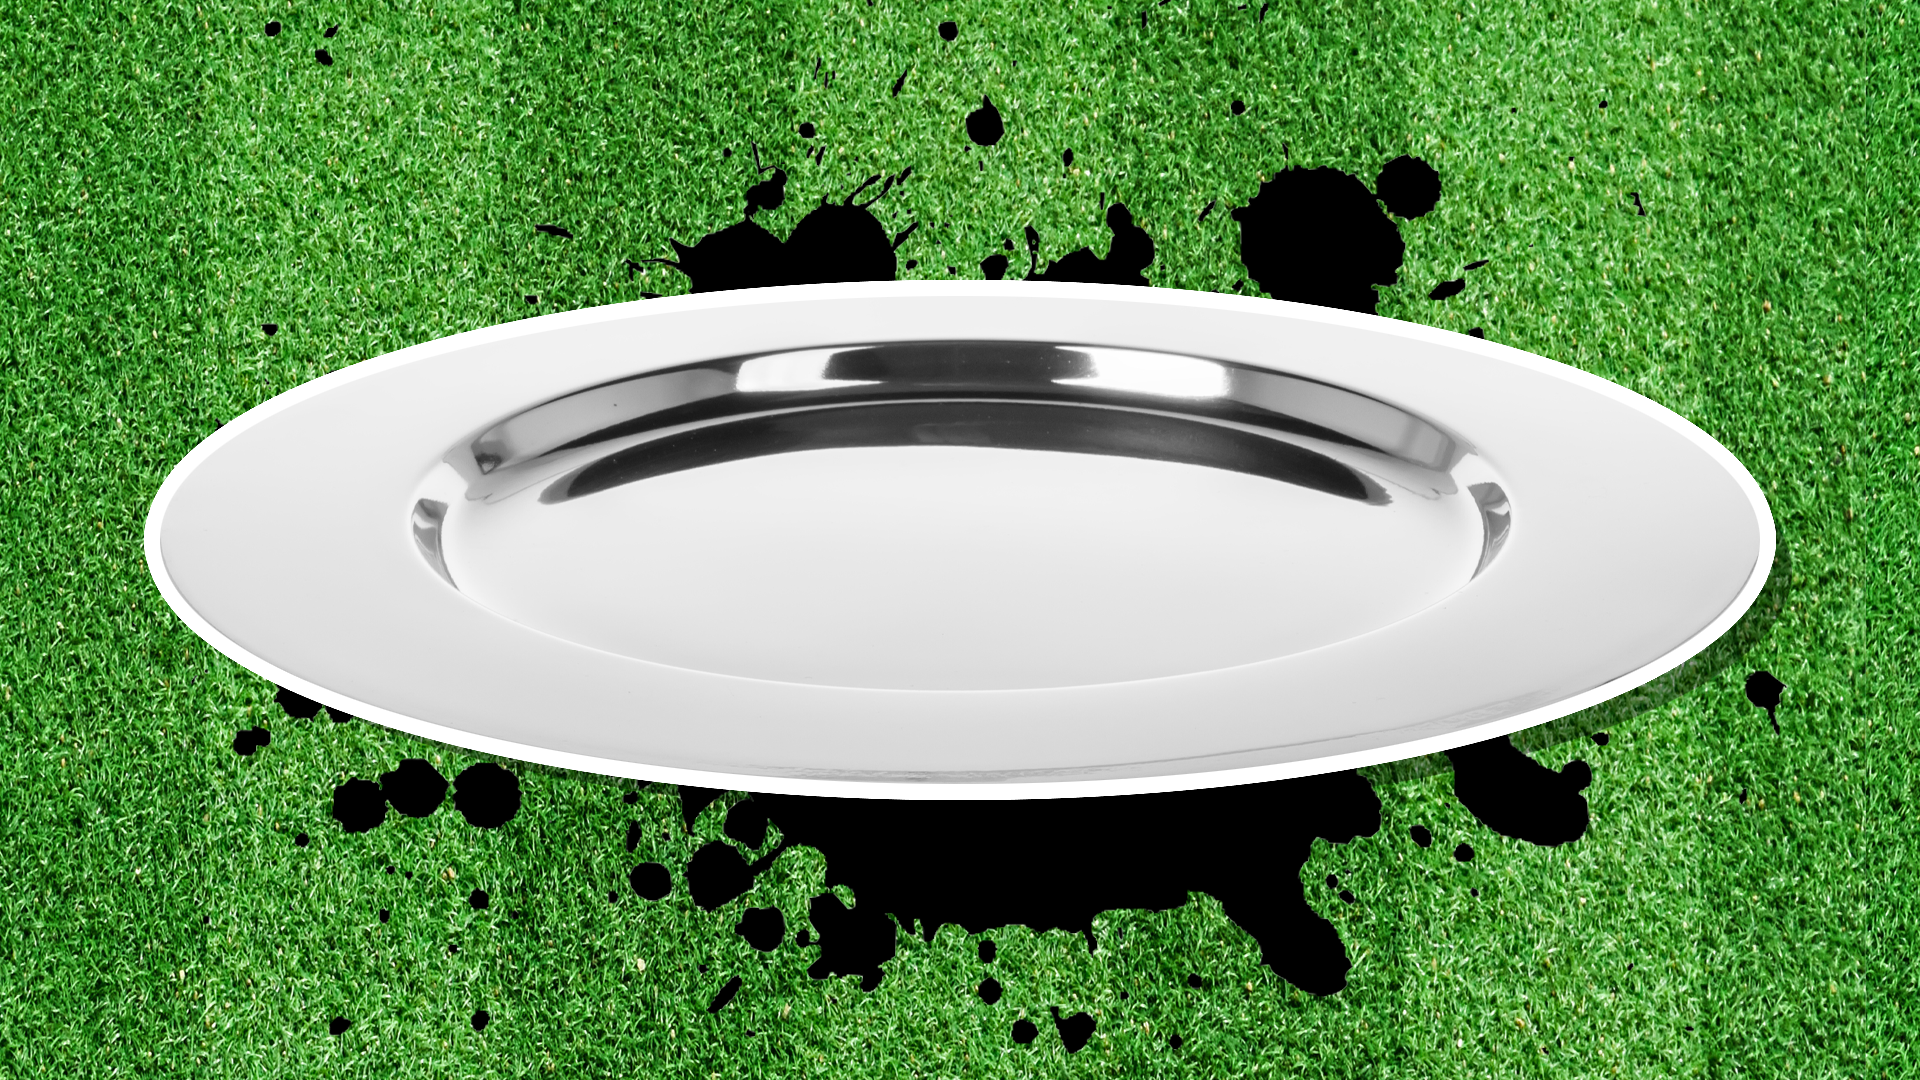 A sliver plate which looks like a football trophy